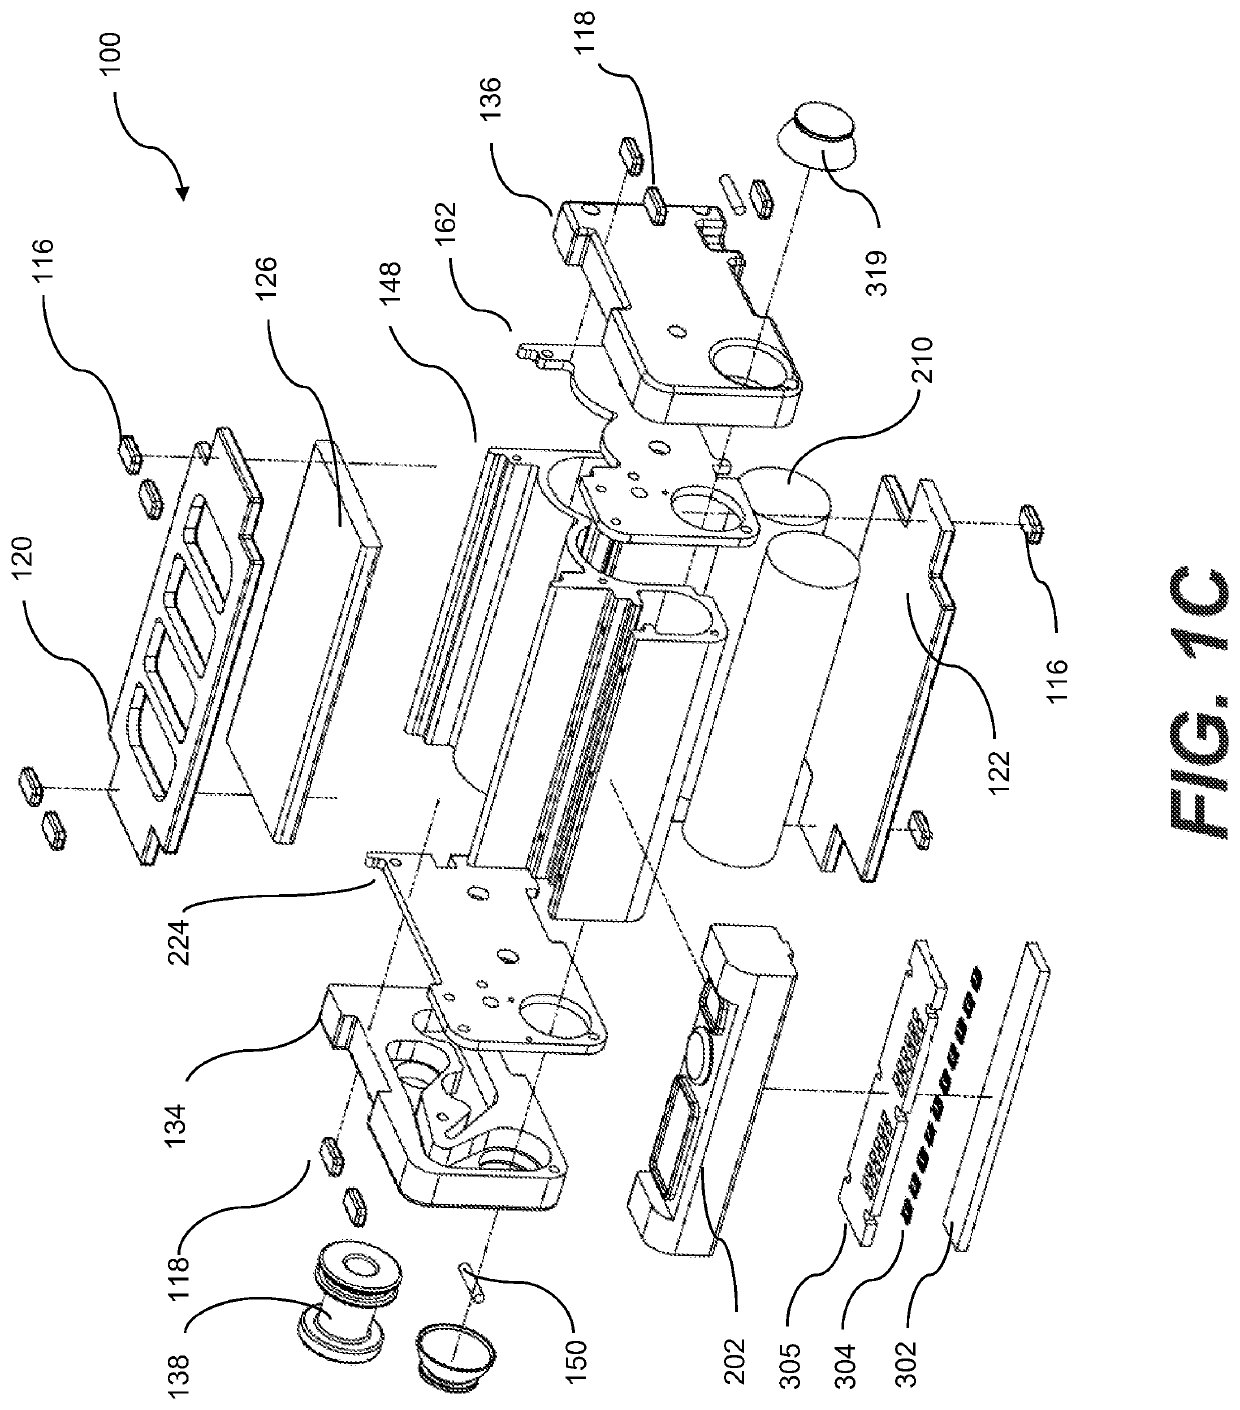 Method, apparatus and system for reducing pathogens in a breathable airstream